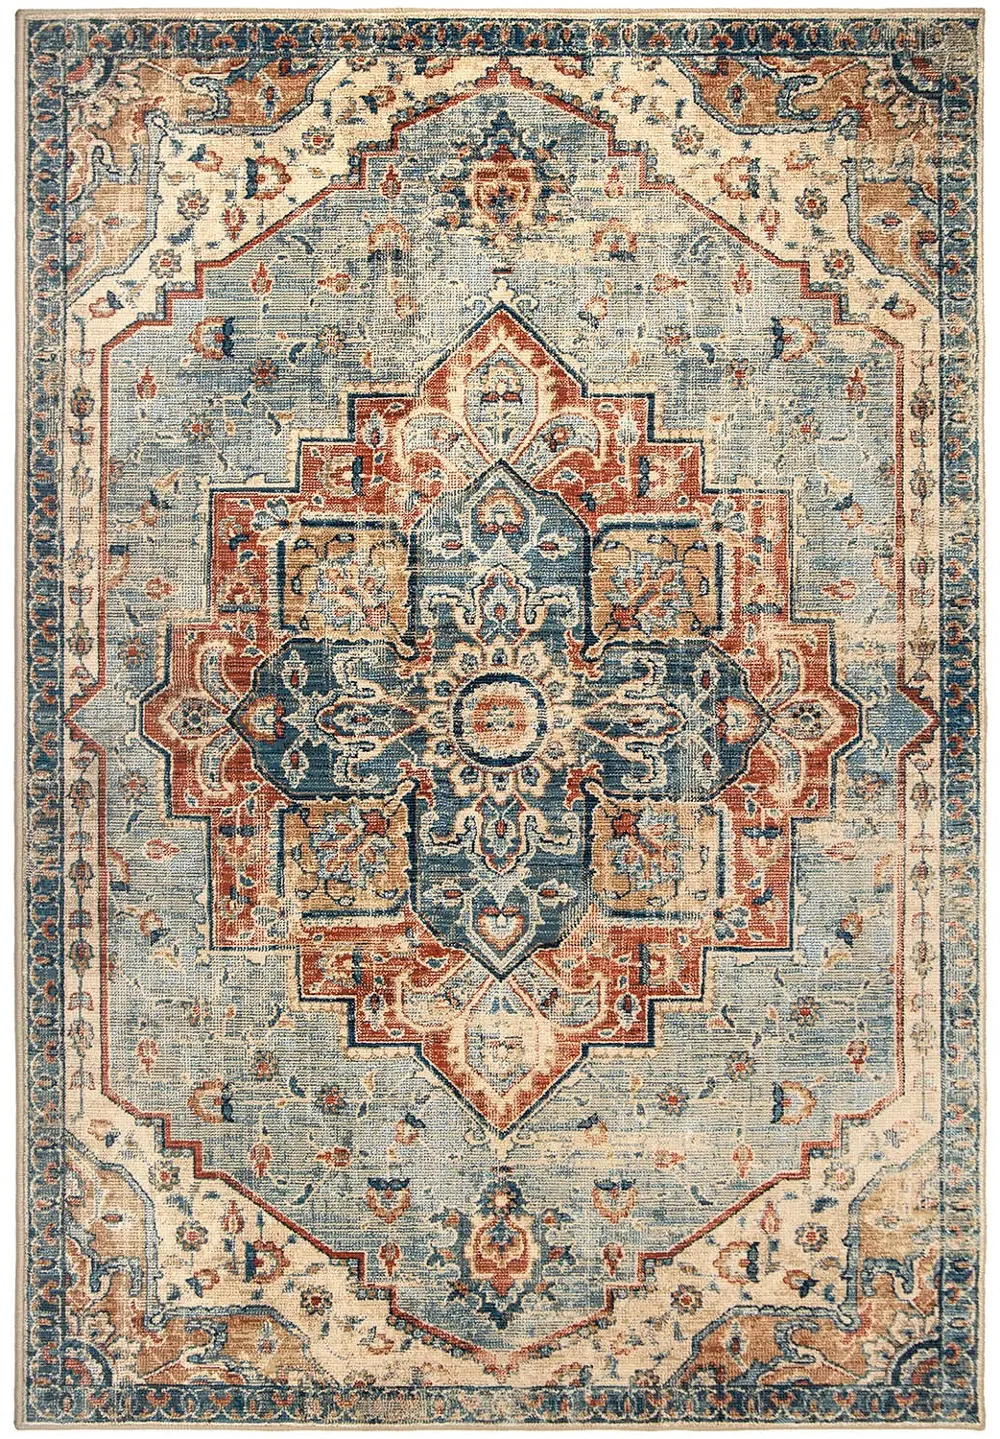 8902-5X8/BL/RED/CREM Alexandria 5 x 8 King Fisher Pale Blue Area Rug-1